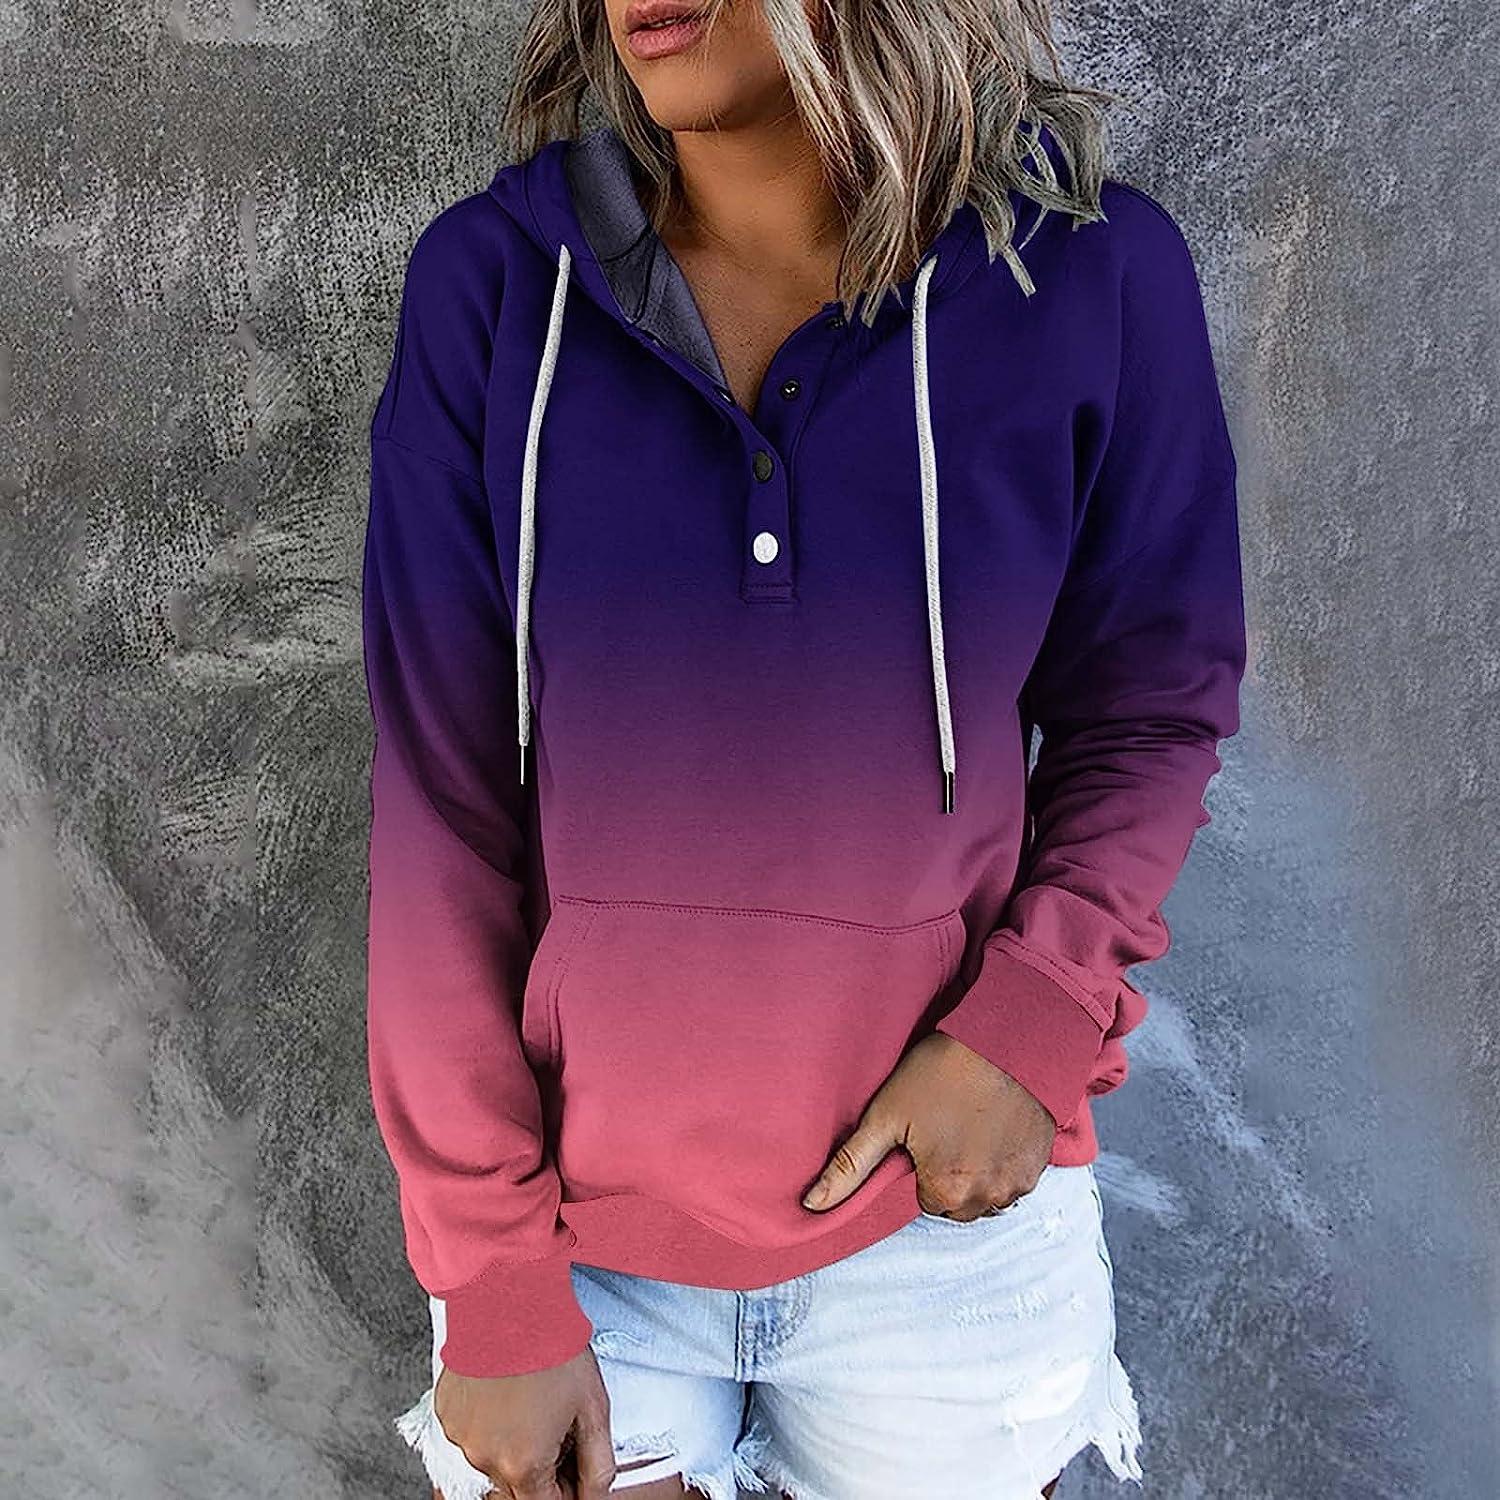 Womens Hoodies Pullover Fall Fashion Tops Graphic Loose Fitting Sweatshirts  Button Down Long Sleeve Shirts with Pocket Medium Purple Button Down Womens  Hoodies Pullover